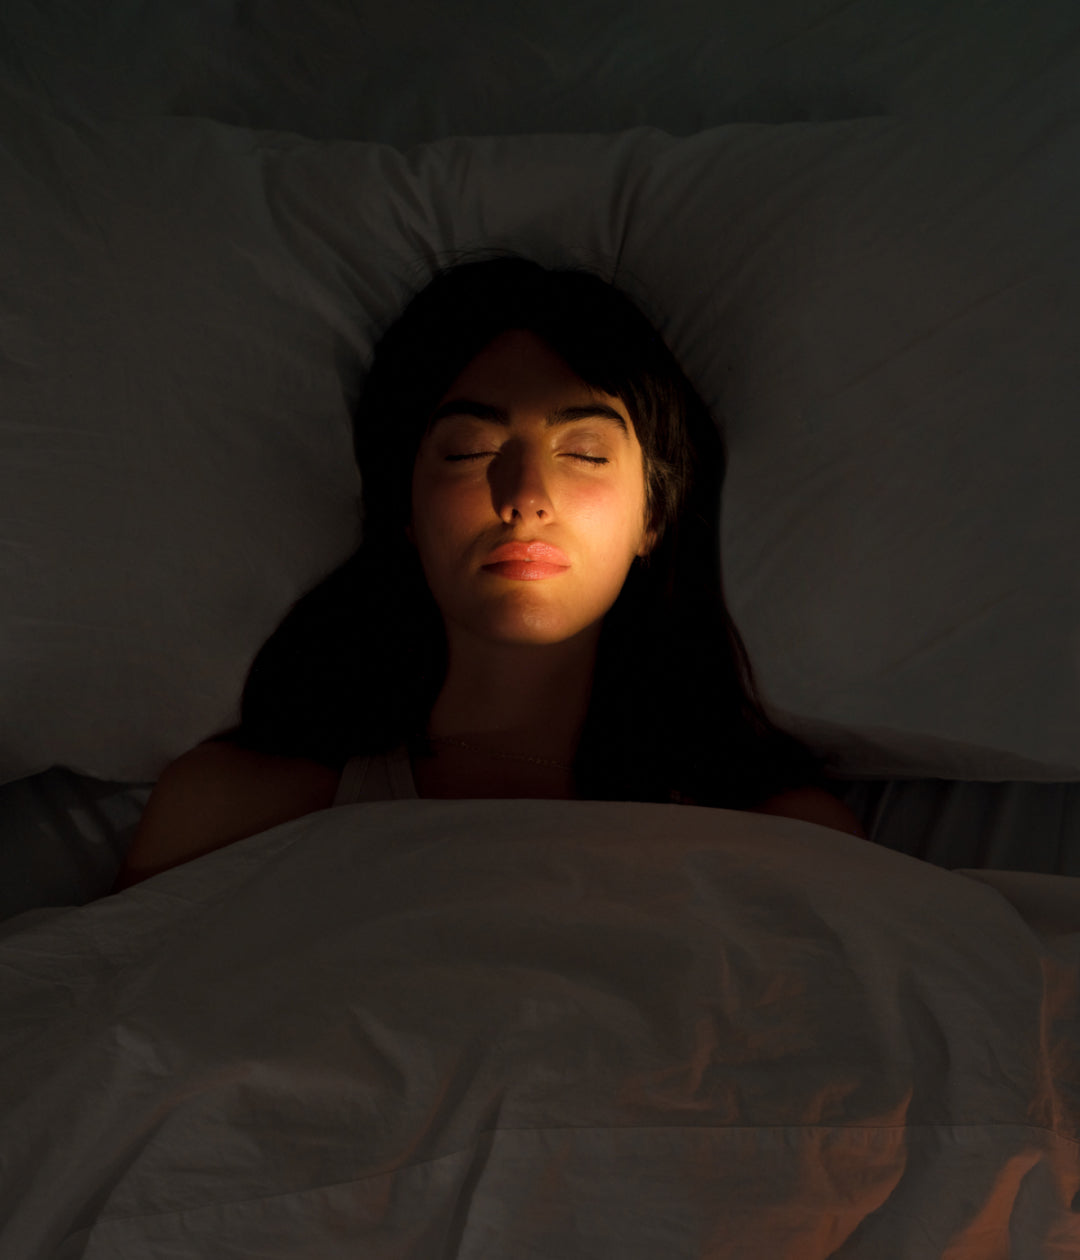 Woman on her phone in bed